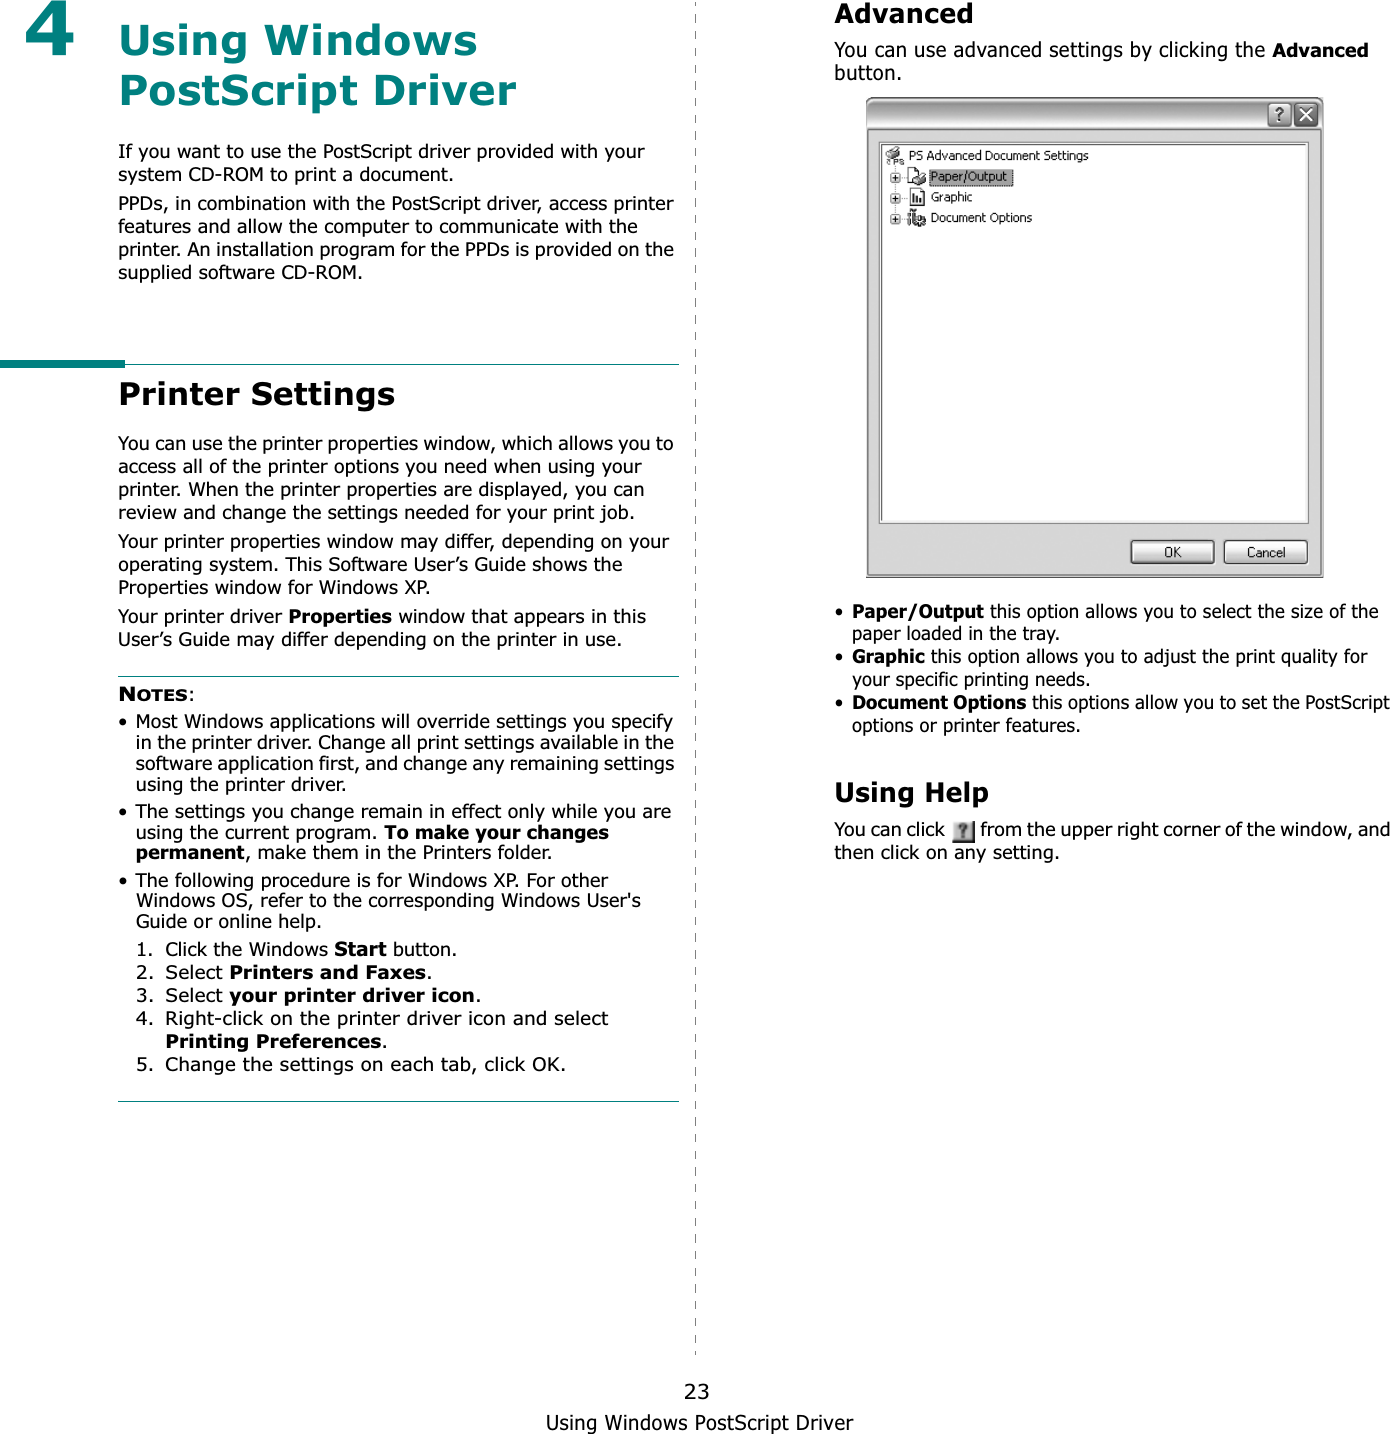 Using Windows PostScript Driver234Using Windows PostScript DriverIf you want to use the PostScript driver provided with your system CD-ROM to print a document.PPDs, in combination with the PostScript driver, access printer features and allow the computer to communicate with the printer. An installation program for the PPDs is provided on the supplied software CD-ROM. Printer SettingsYou can use the printer properties window, which allows you to access all of the printer options you need when using your printer. When the printer properties are displayed, you can review and change the settings needed for your print job. Your printer properties window may differ, depending on your operating system. This Software User’s Guide shows the Properties window for Windows XP.Your printer driver Properties window that appears in this User’s Guide may differ depending on the printer in use.NOTES:• Most Windows applications will override settings you specify in the printer driver. Change all print settings available in the software application first, and change any remaining settings using the printer driver. • The settings you change remain in effect only while you are using the current program. To make your changes permanent, make them in the Printers folder. • The following procedure is for Windows XP. For other Windows OS, refer to the corresponding Windows User&apos;s Guide or online help.1. Click the Windows Start button.2. Select Printers and Faxes.3. Select your printer driver icon.4. Right-click on the printer driver icon and select Printing Preferences.5. Change the settings on each tab, click OK.AdvancedYou can use advanced settings by clicking the Advancedbutton.•Paper/Output this option allows you to select the size of the paper loaded in the tray.•Graphicthis option allows you to adjust the print quality for your specific printing needs.•Document Optionsthis options allow you to set the PostScript options or printer features.Using HelpYou can click   from the upper right corner of the window, and then click on any setting. 